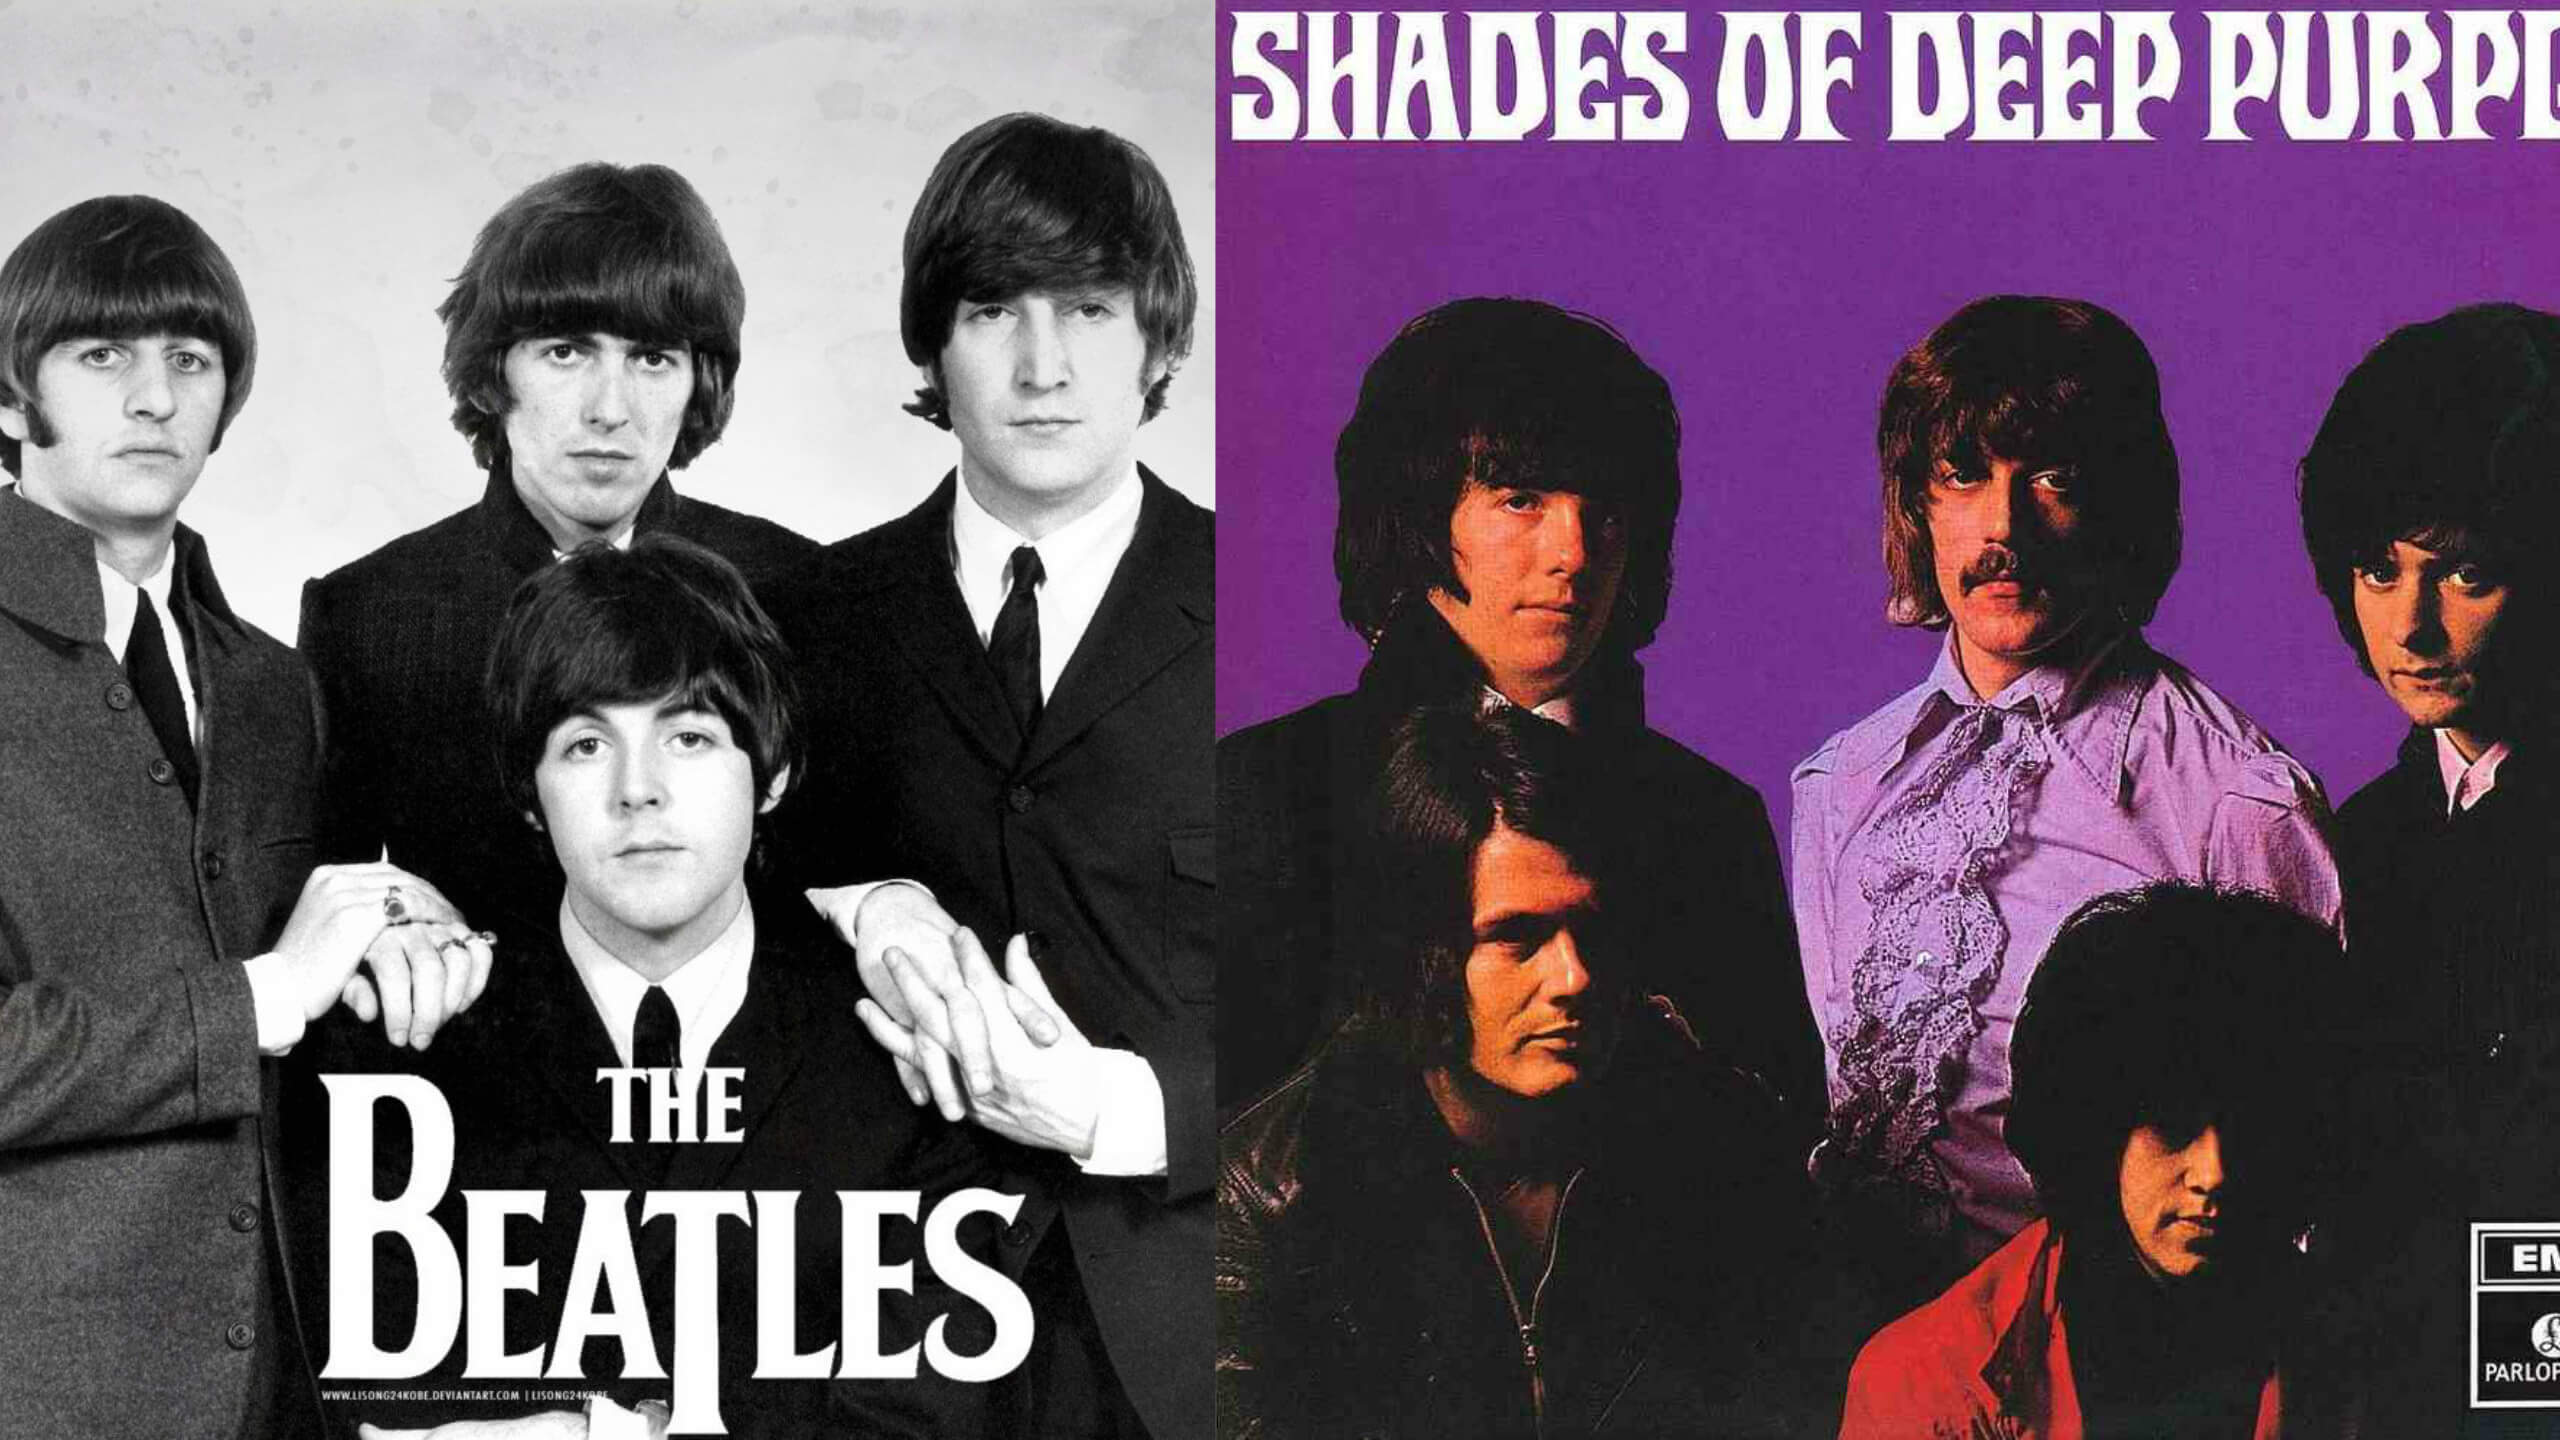 Original X Cover 1 Help The Beatles Deep Purple,How To Decorate Your Room With Led Lights